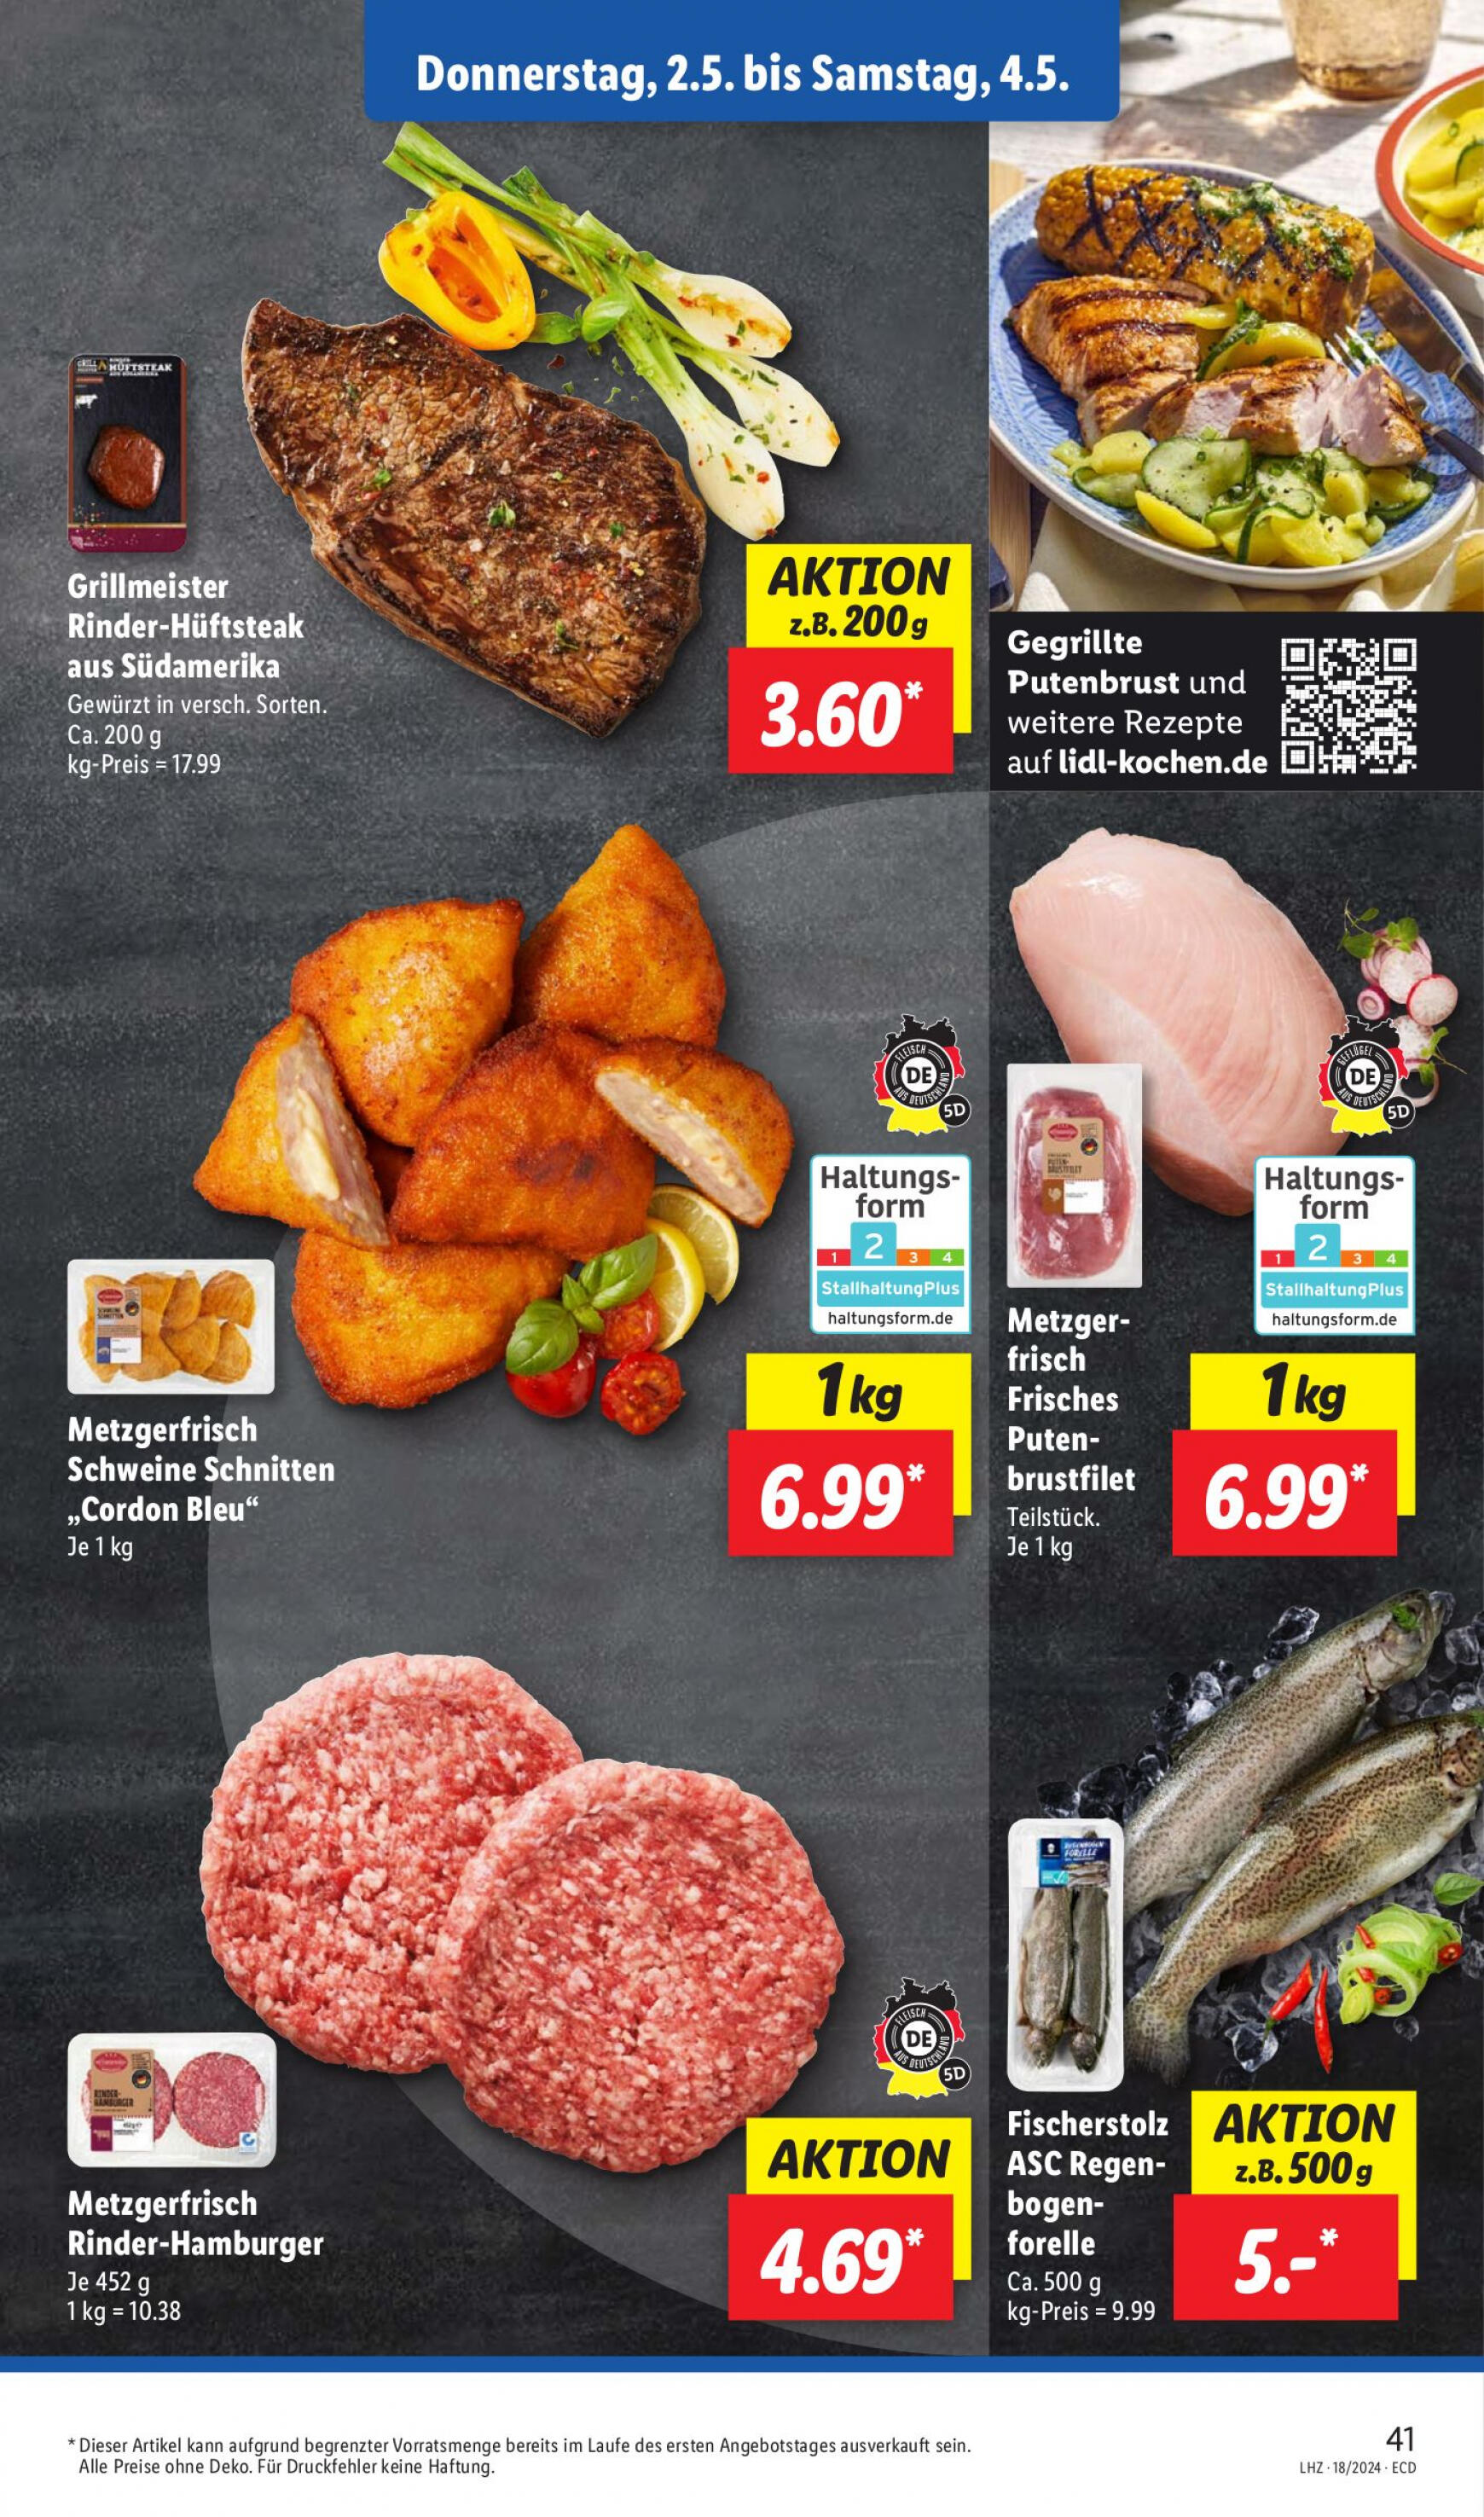 lidl - Flyer Lidl aktuell 29.04. - 04.05. - page: 51